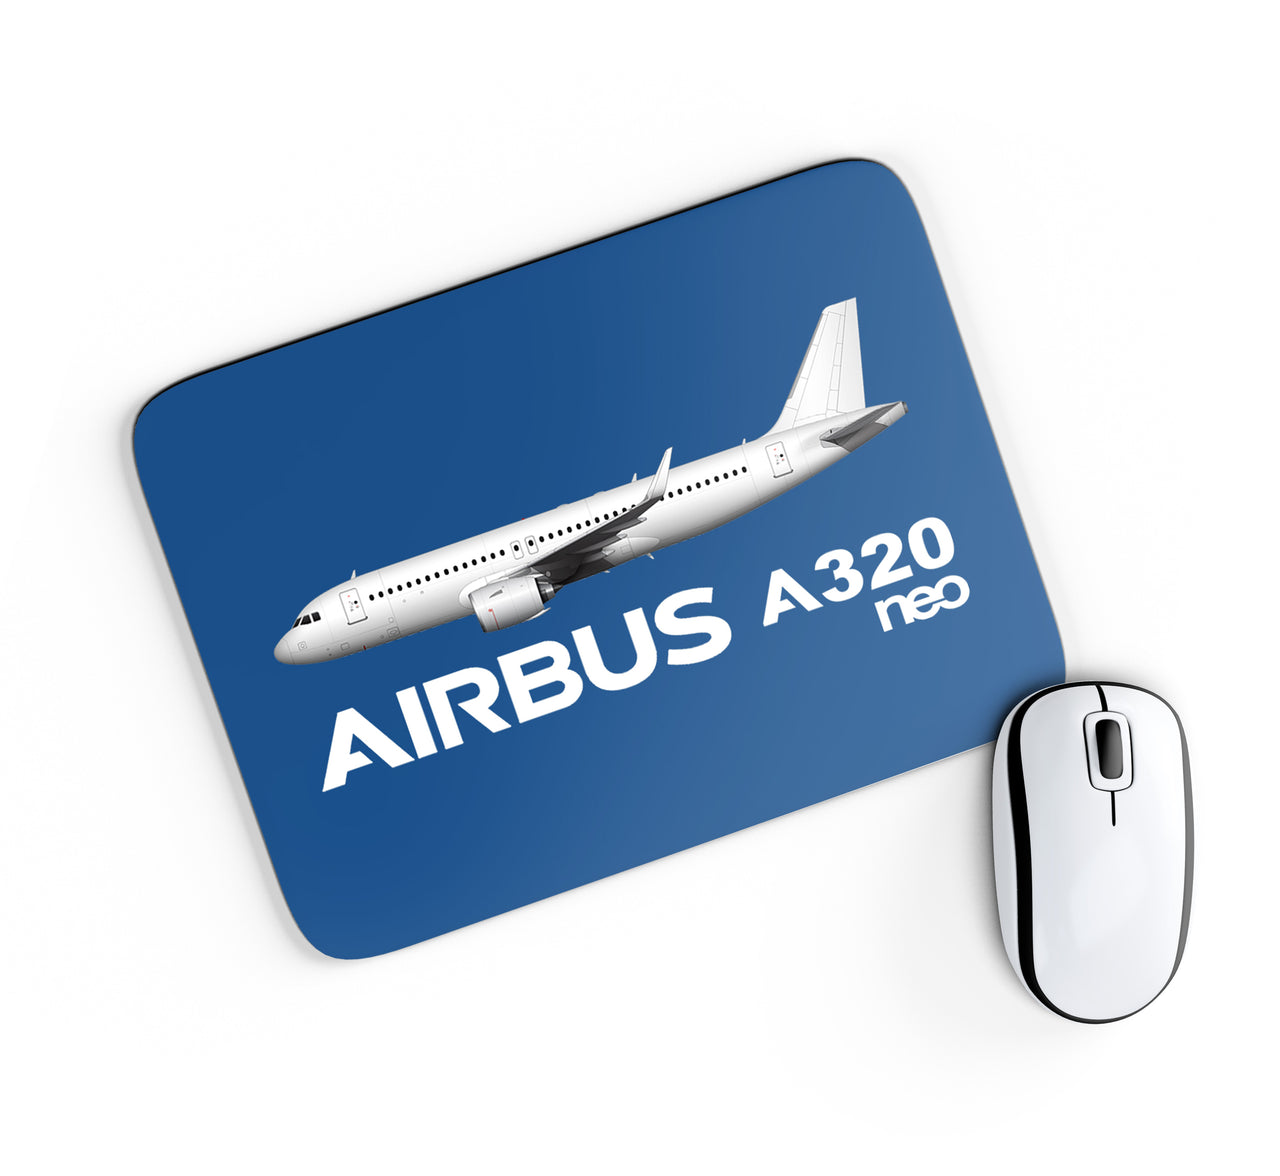 The Airbus A320Neo Designed Mouse Pads